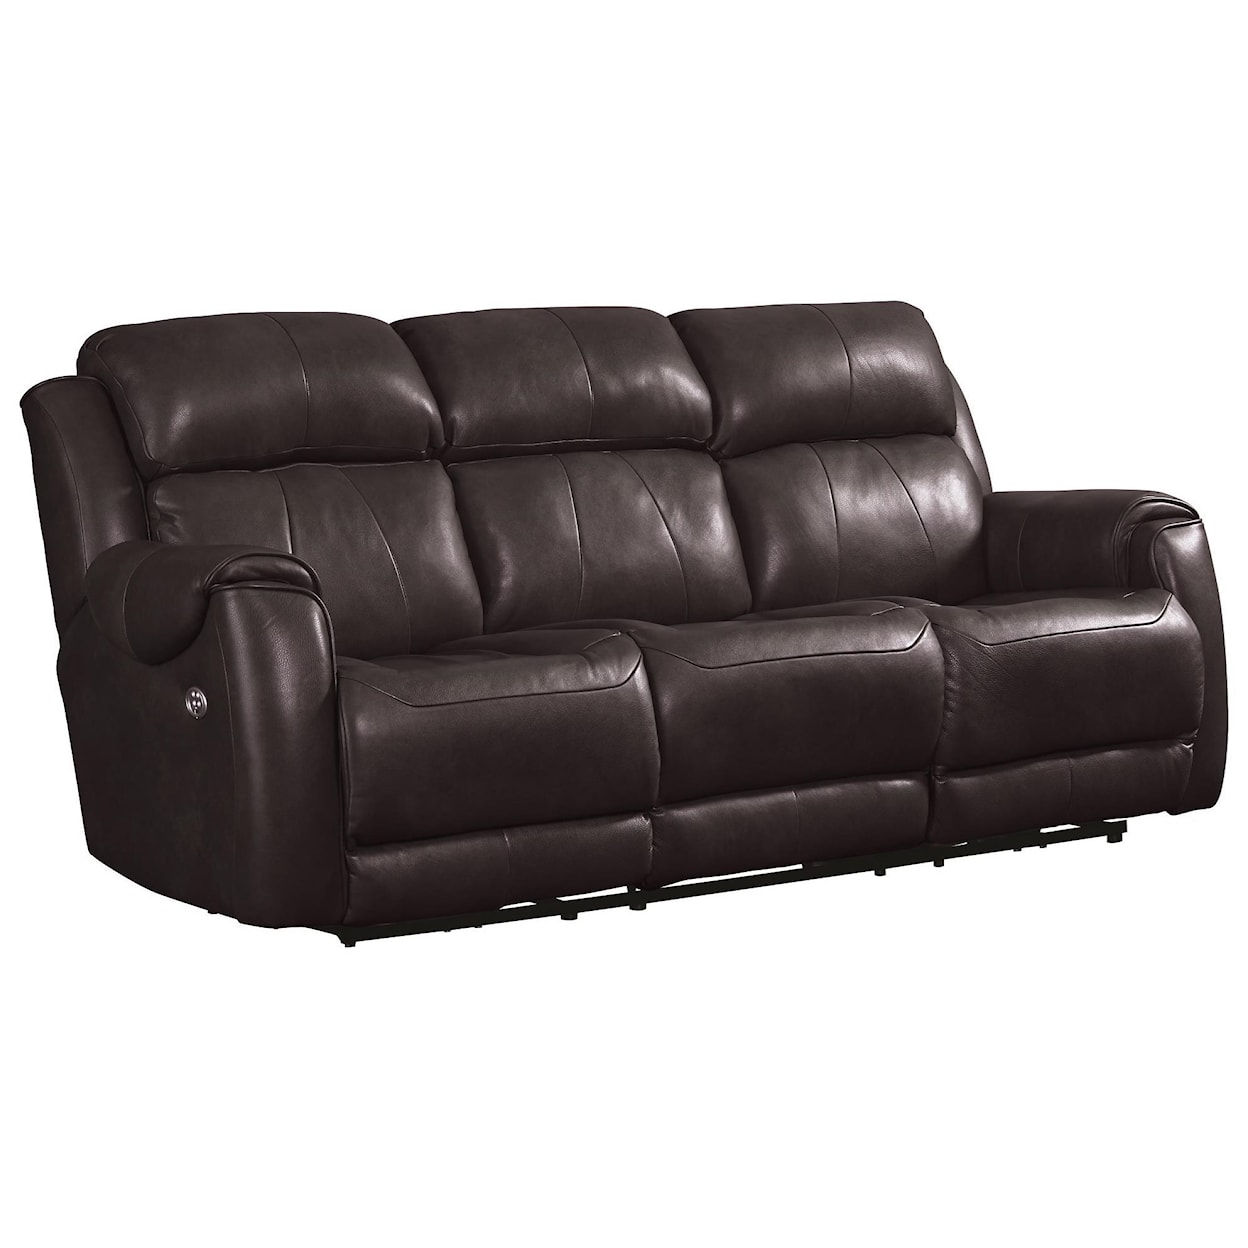 Southern Motion 29866 Power Double Reclining Sofa